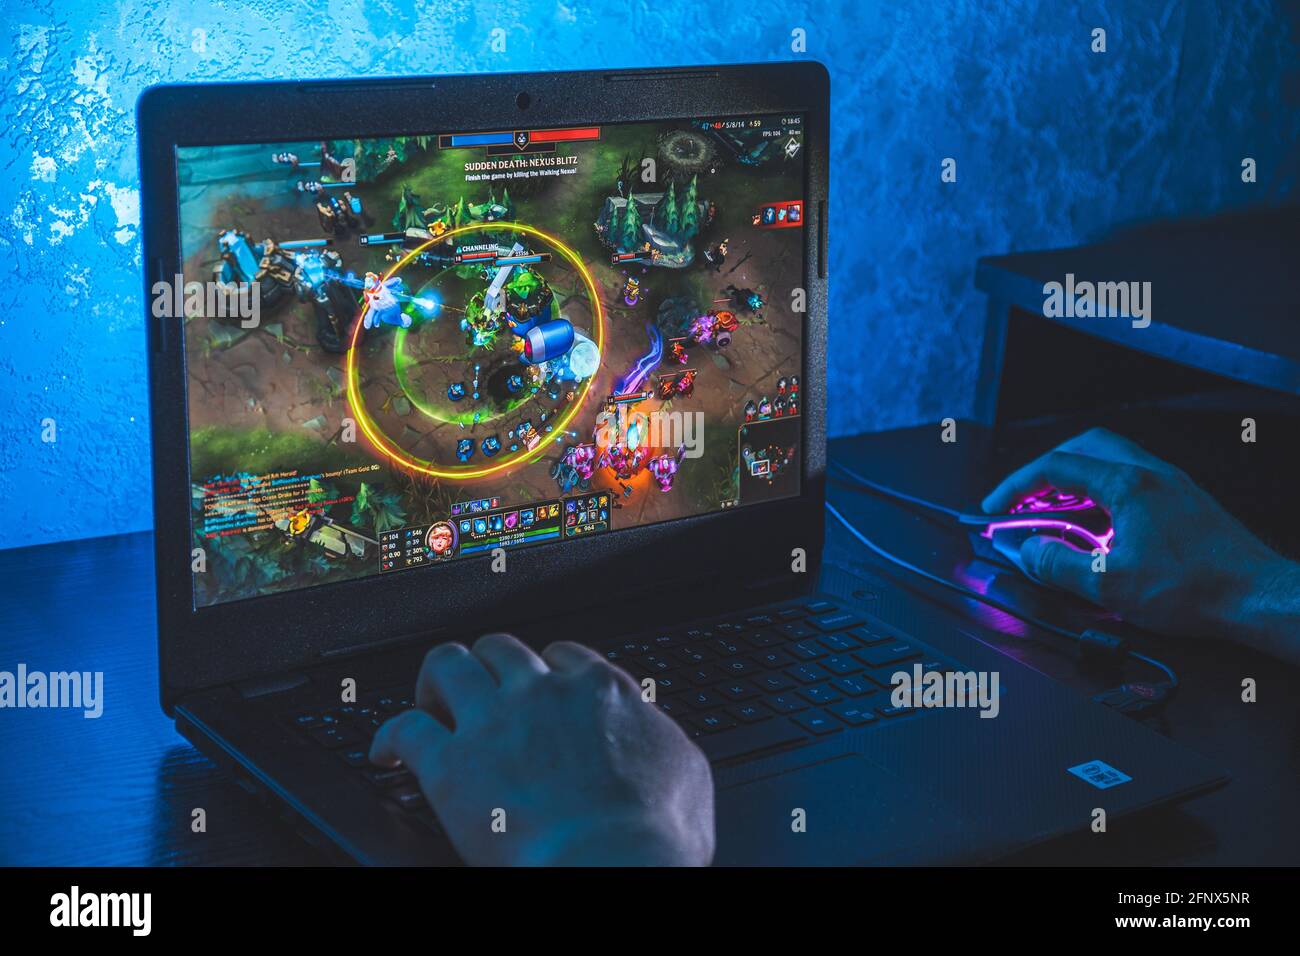 Person playing league of legends video game on computer Stock Photo